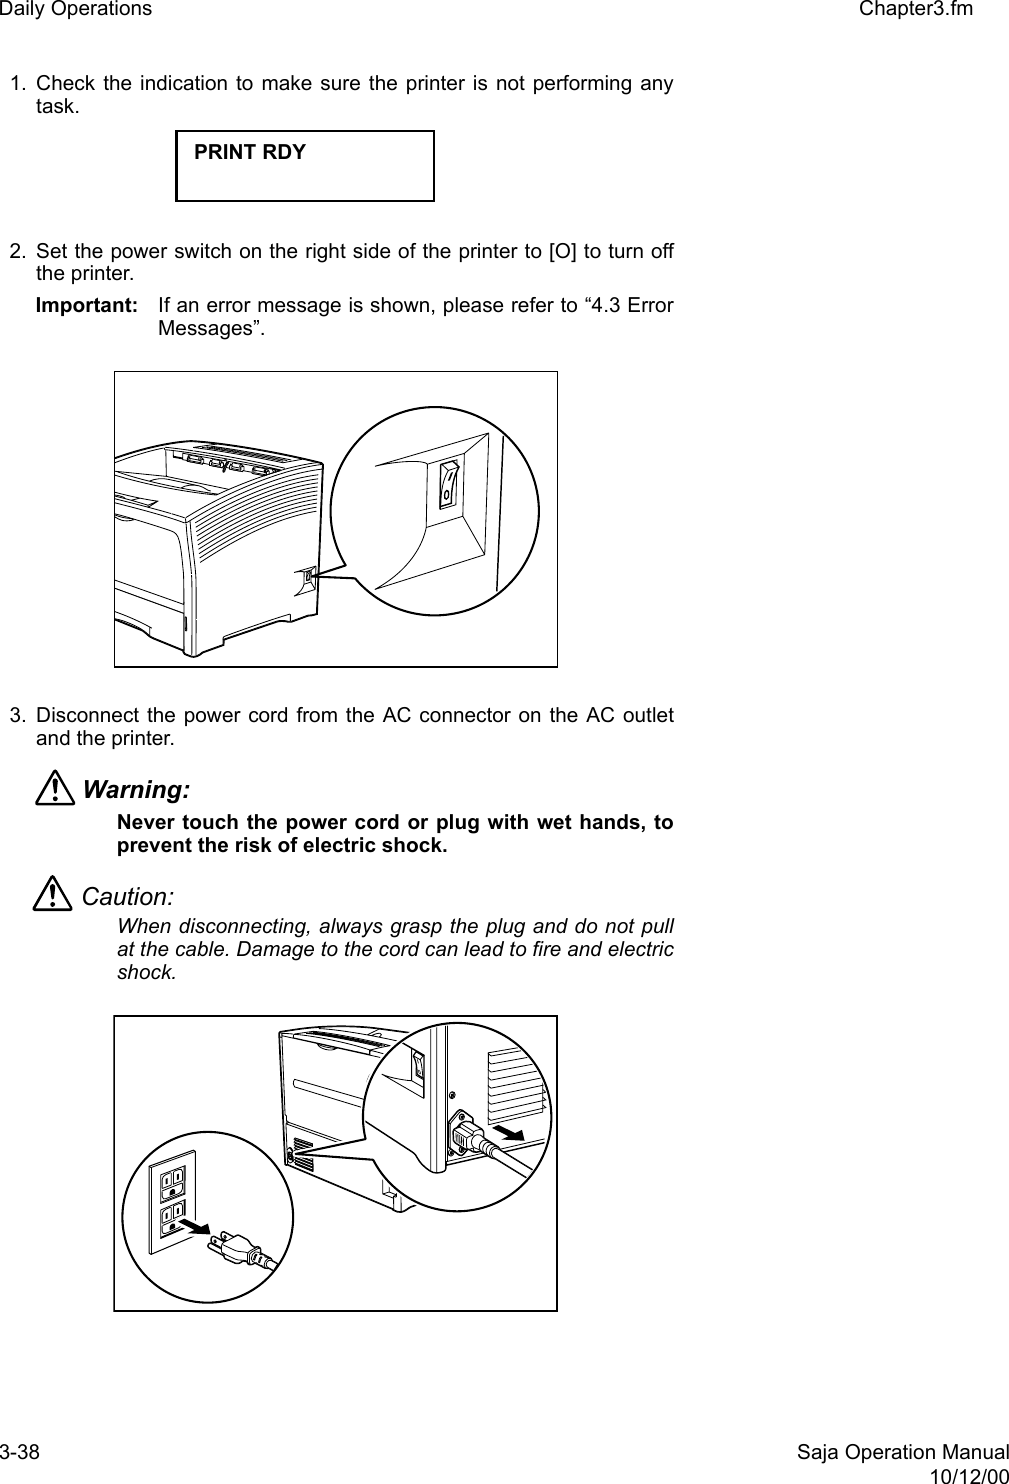 3-38 Saja Operation Manual10/12/00Daily Operations Chapter3.fm1. Check the indication to make sure the printer is not performing anytask. 2. Set the power switch on the right side of the printer to [O] to turn offthe printer. Important: If an error message is shown, please refer to “4.3 ErrorMessages”. 3. Disconnect the power cord from the AC connector on the AC outletand the printer.Warning: Never touch the power cord or plug with wet hands, toprevent the risk of electric shock. Caution: When disconnecting, always grasp the plug and do not pullat the cable. Damage to the cord can lead to fire and electricshock. PRINT RDY